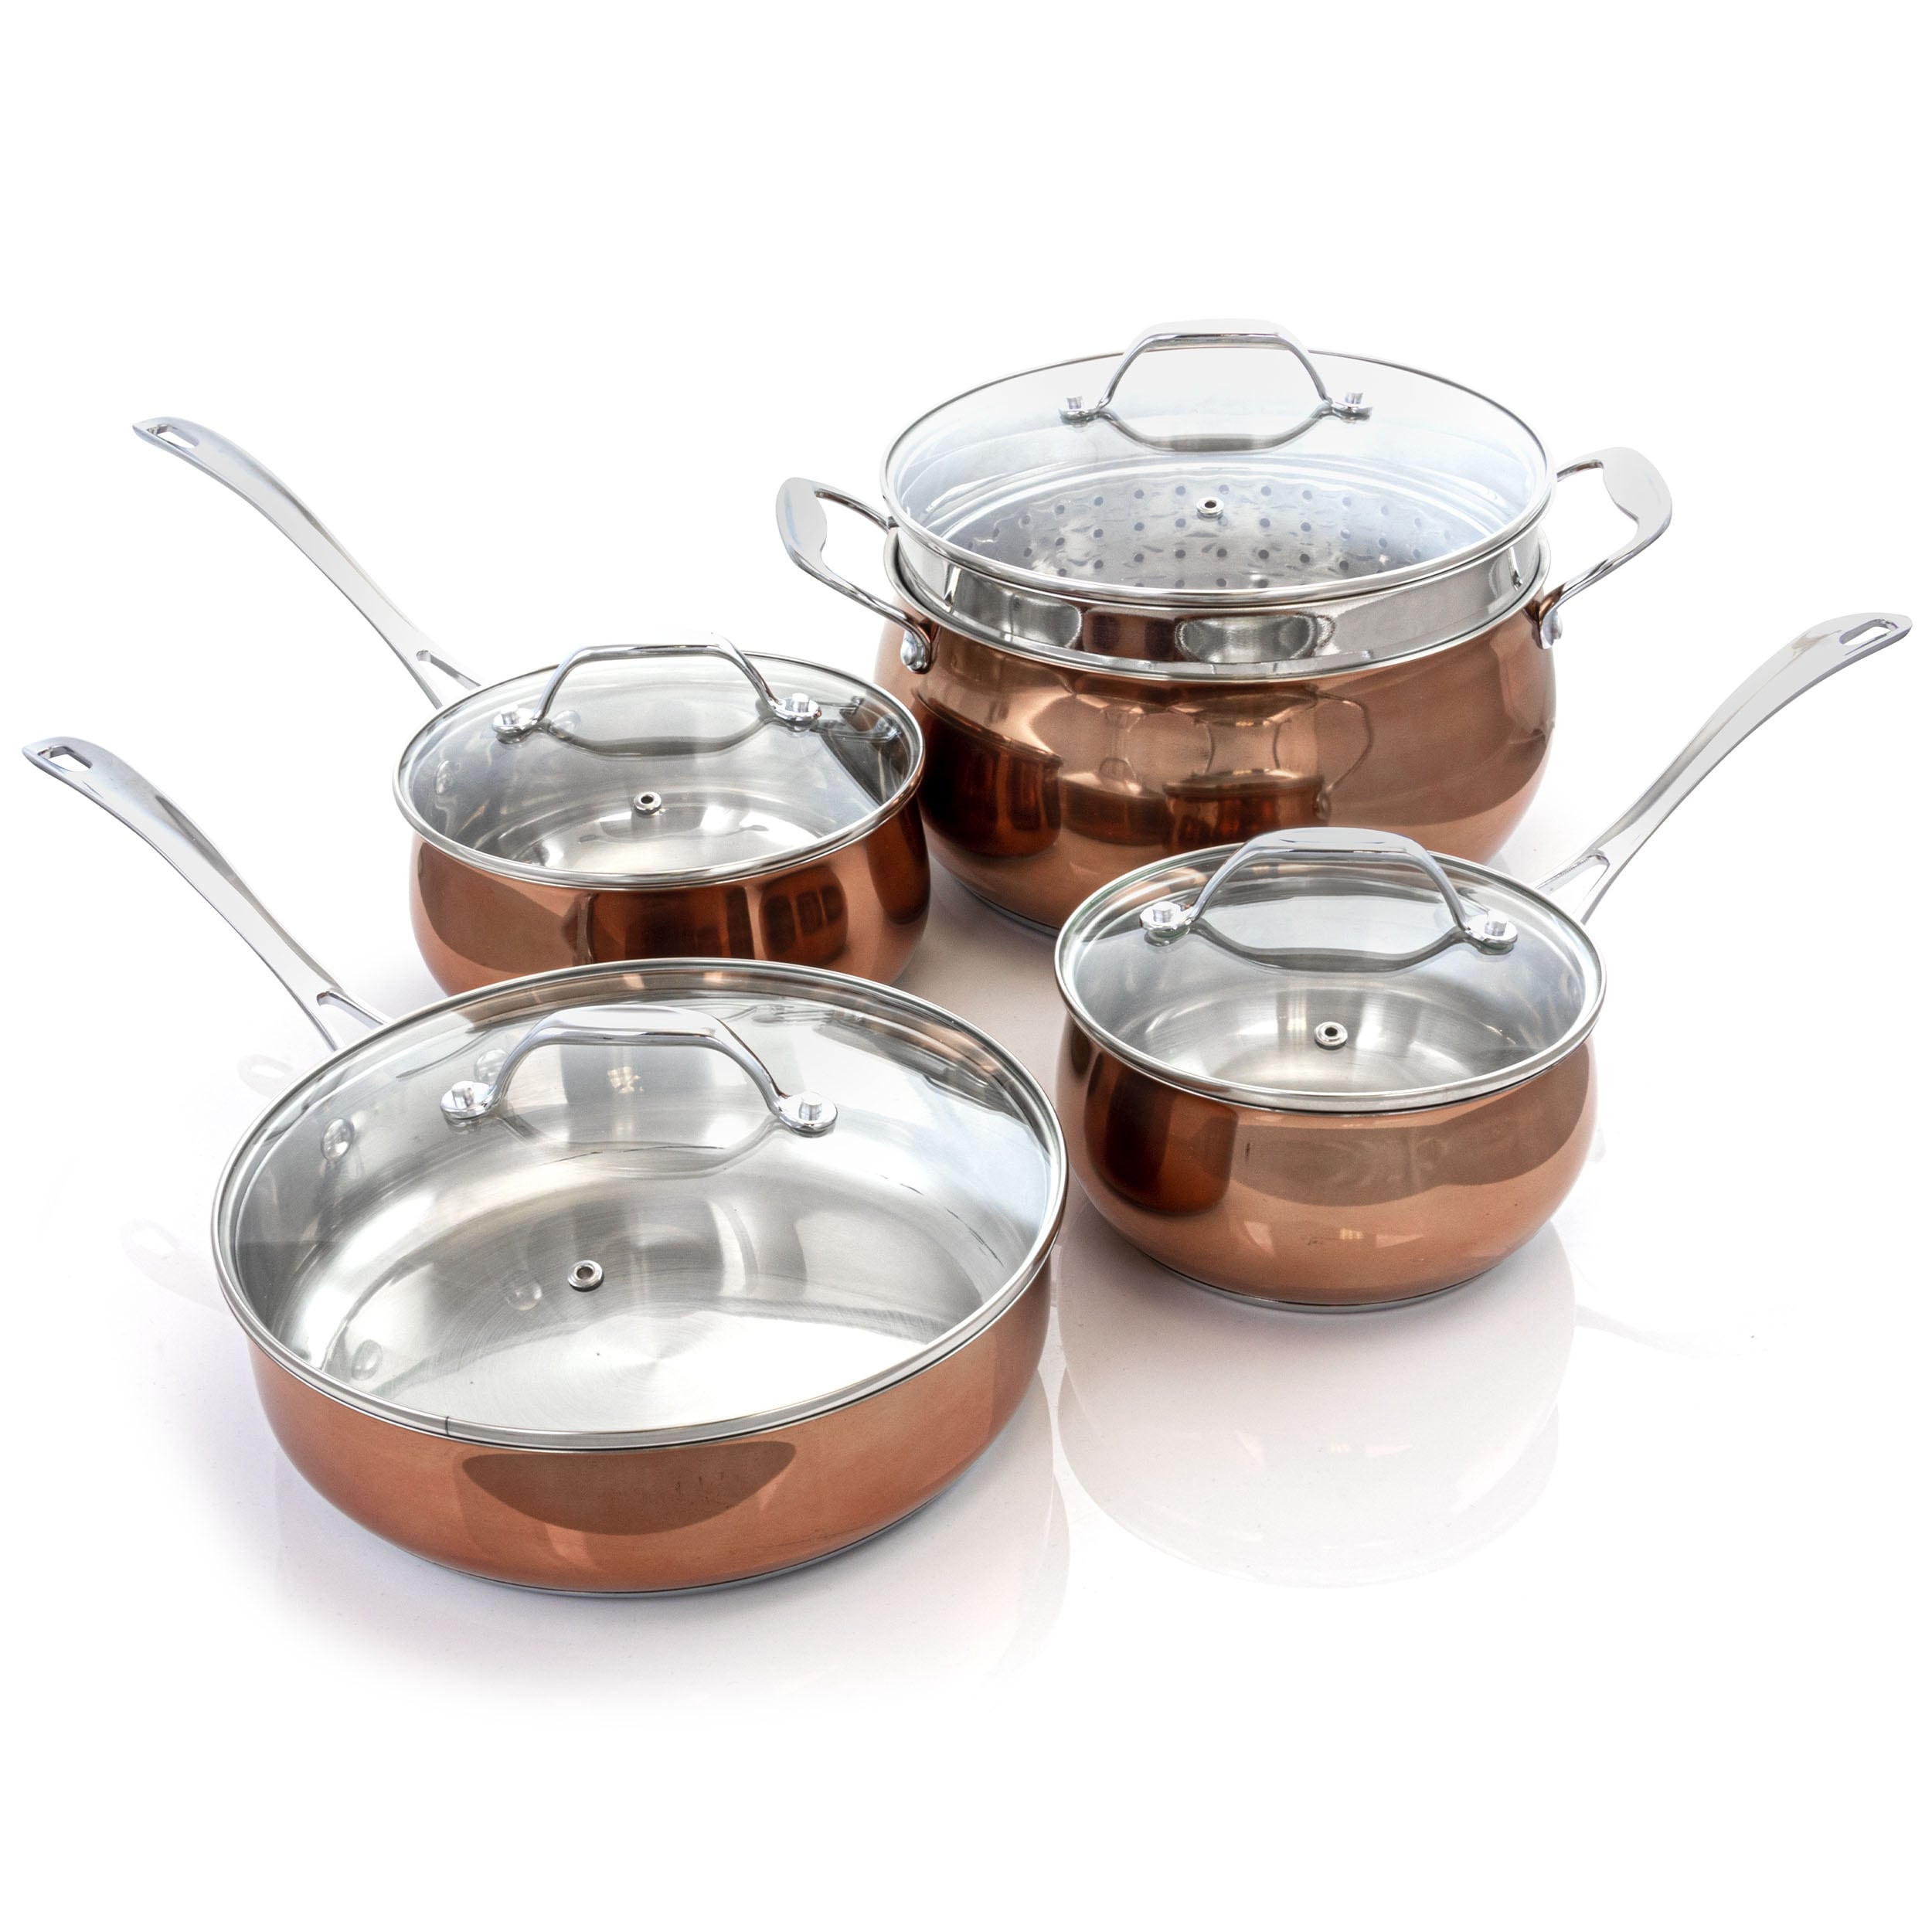 https://ak1.ostkcdn.com/images/products/is/images/direct/3da2ed7e2b14393dc974faaa9d95a4465ae23bb1/Stainless-Steel-Cookware-9-Piece-Set-in-Silver-and-Bronze.jpg